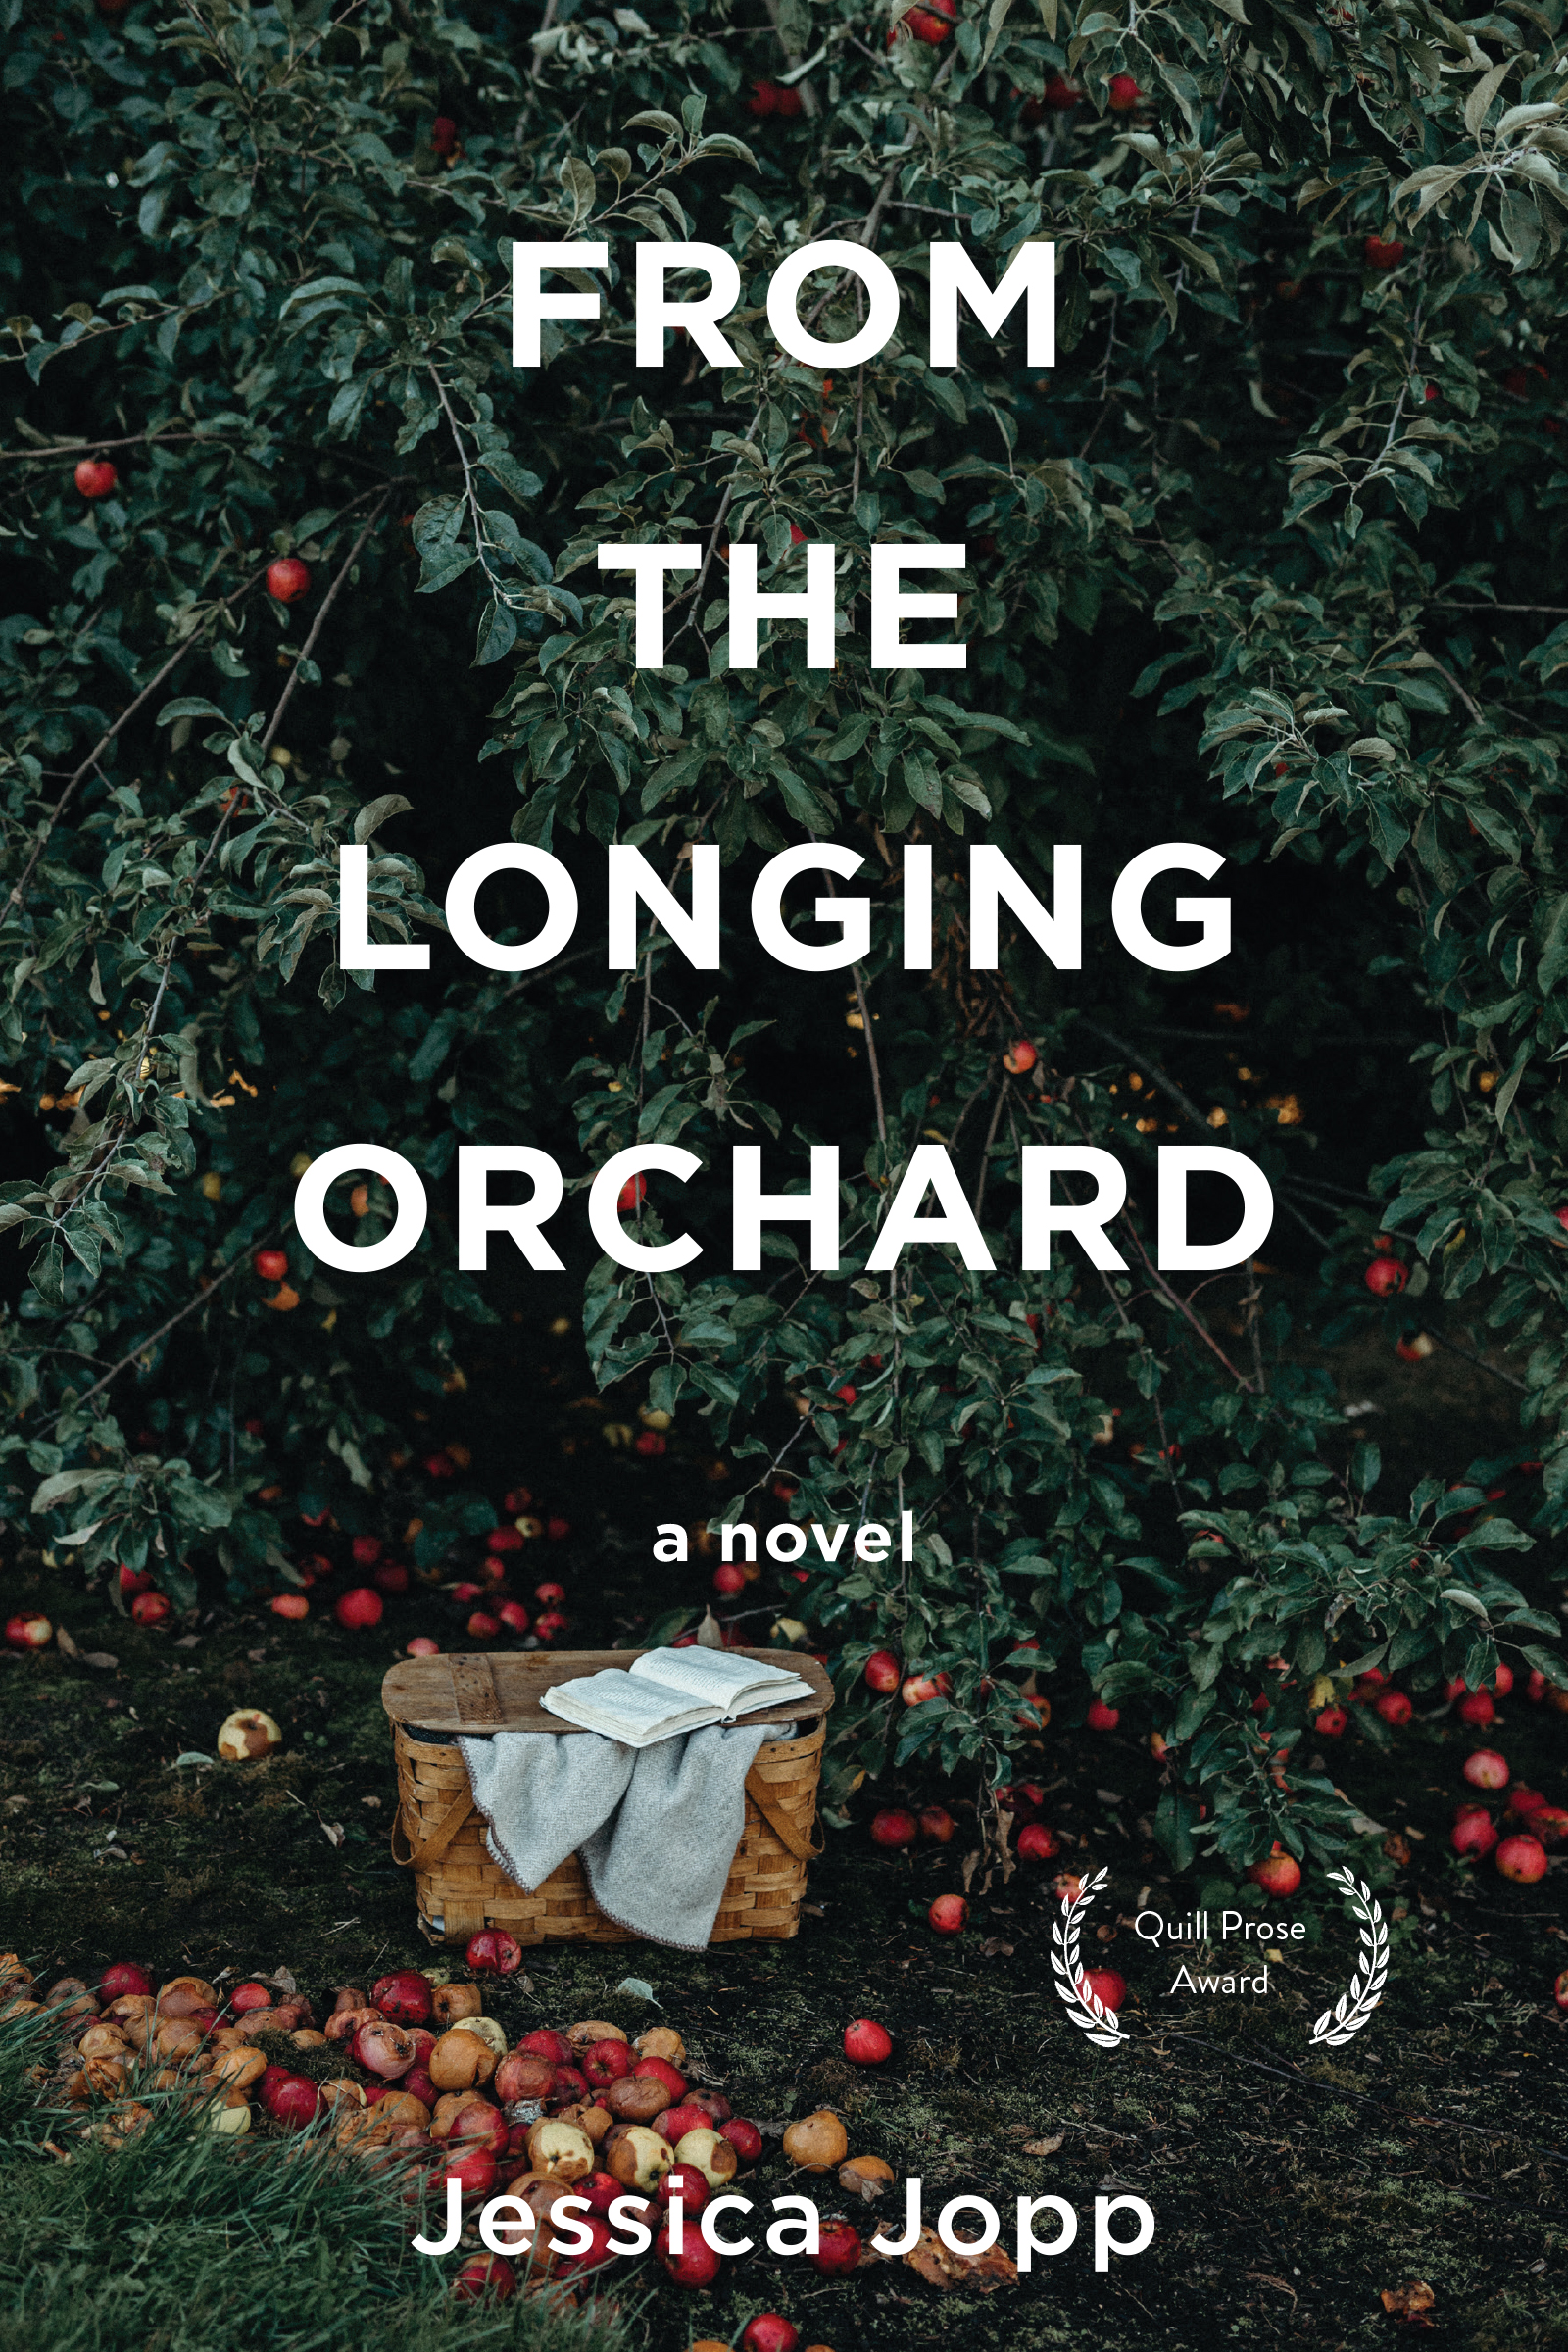 A photograph of an apple tree with a picnic basket and apples on the ground with white text reading "From the Longing Orchard, a novel by Jessica Jopp"